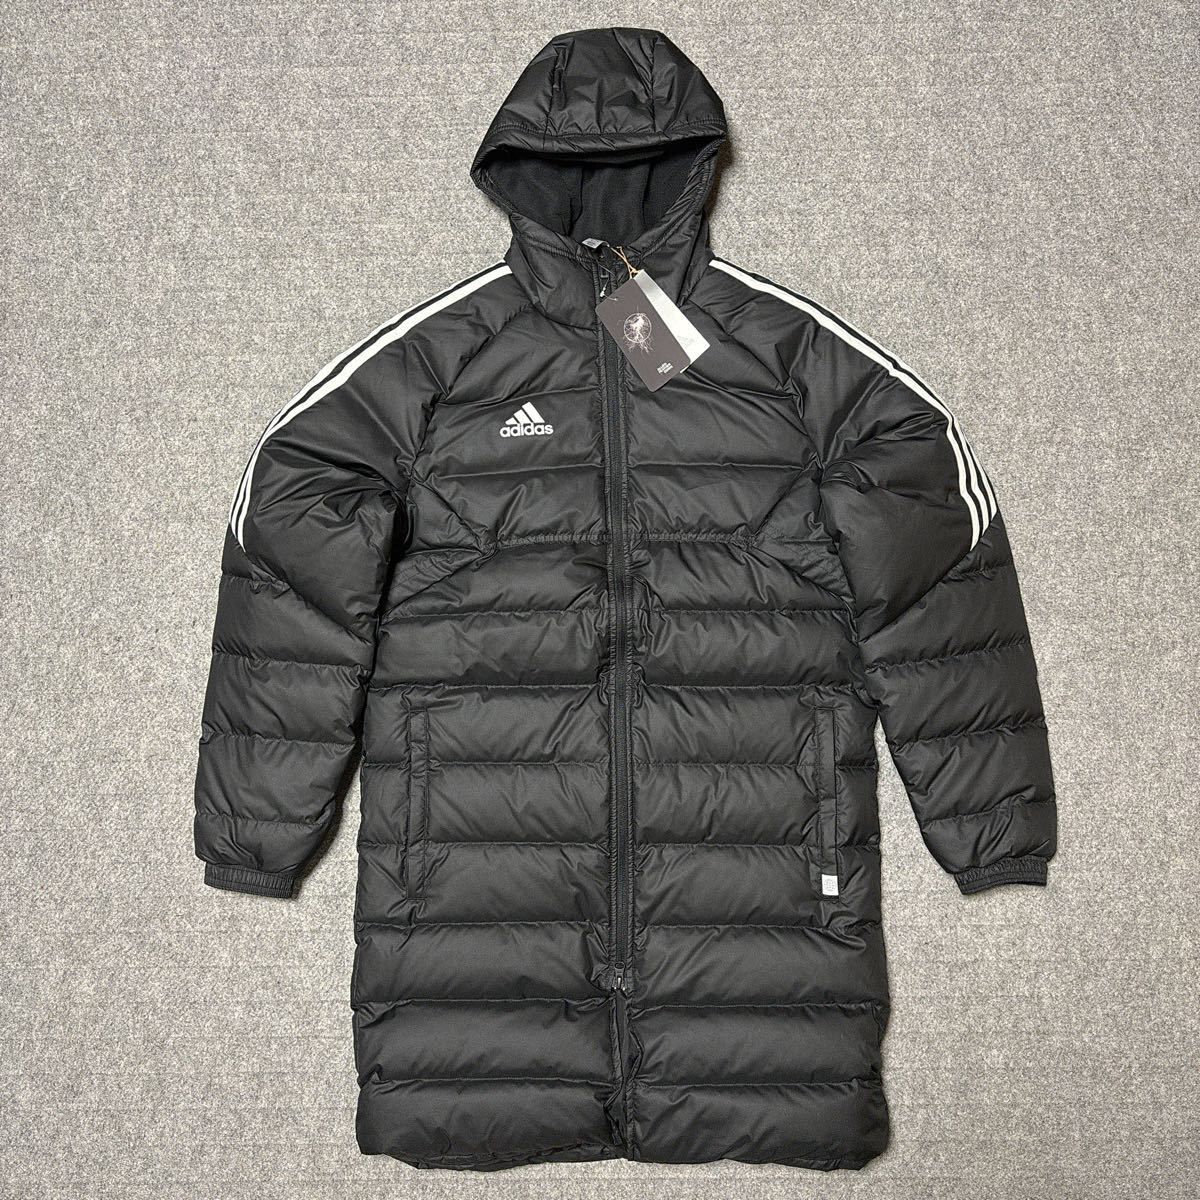 3XO(4XL) size * new goods Adidas CONDIVO 22 down coat long coat bench coat black light weight down jacket protection against cold H1256 5L